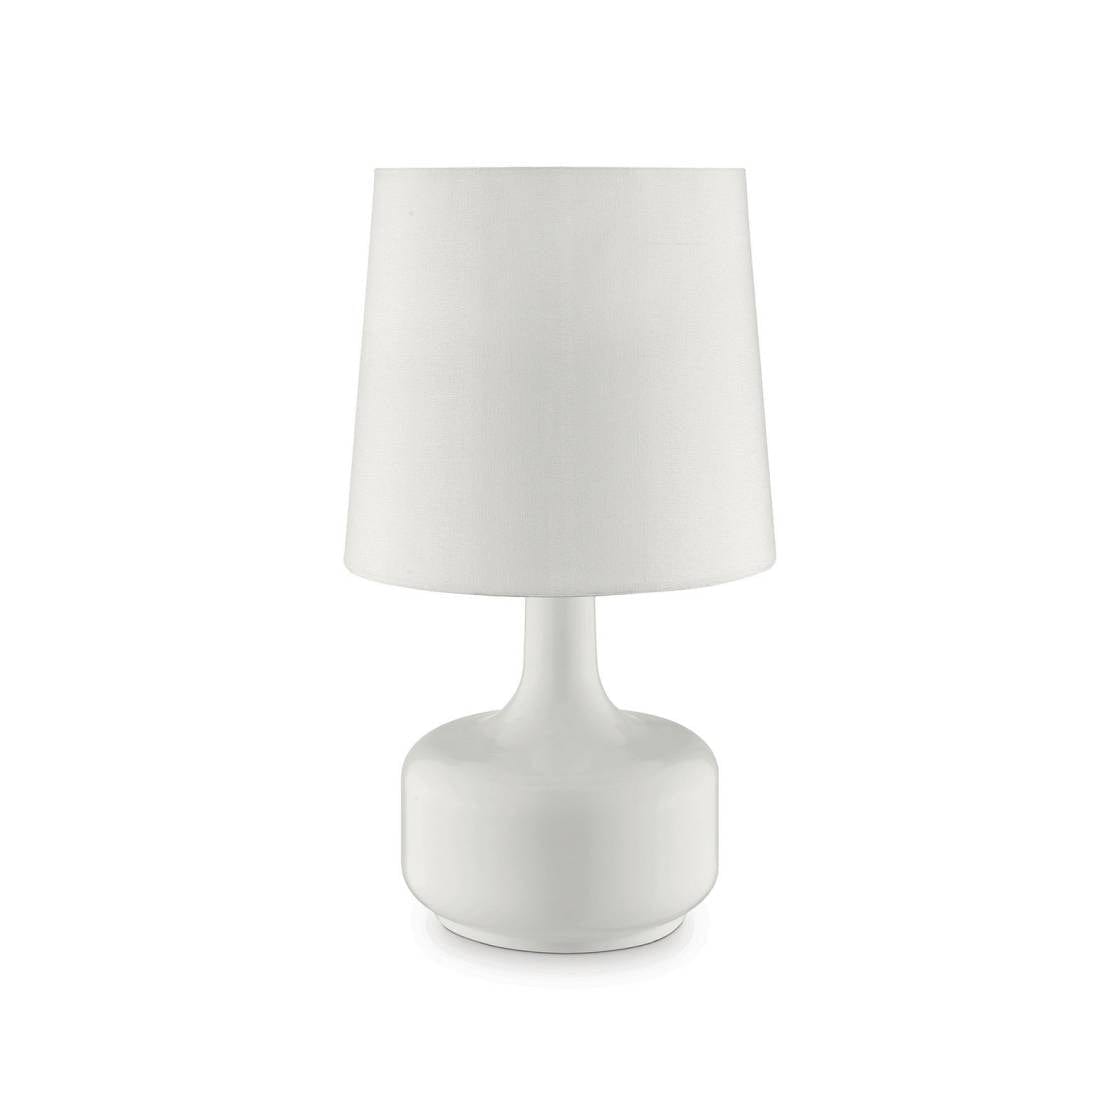 Benzara Contemporary Table Lamp With Tapered Drum Shade And Pot Belly Base, White By Benzara Table Lamps BM209052